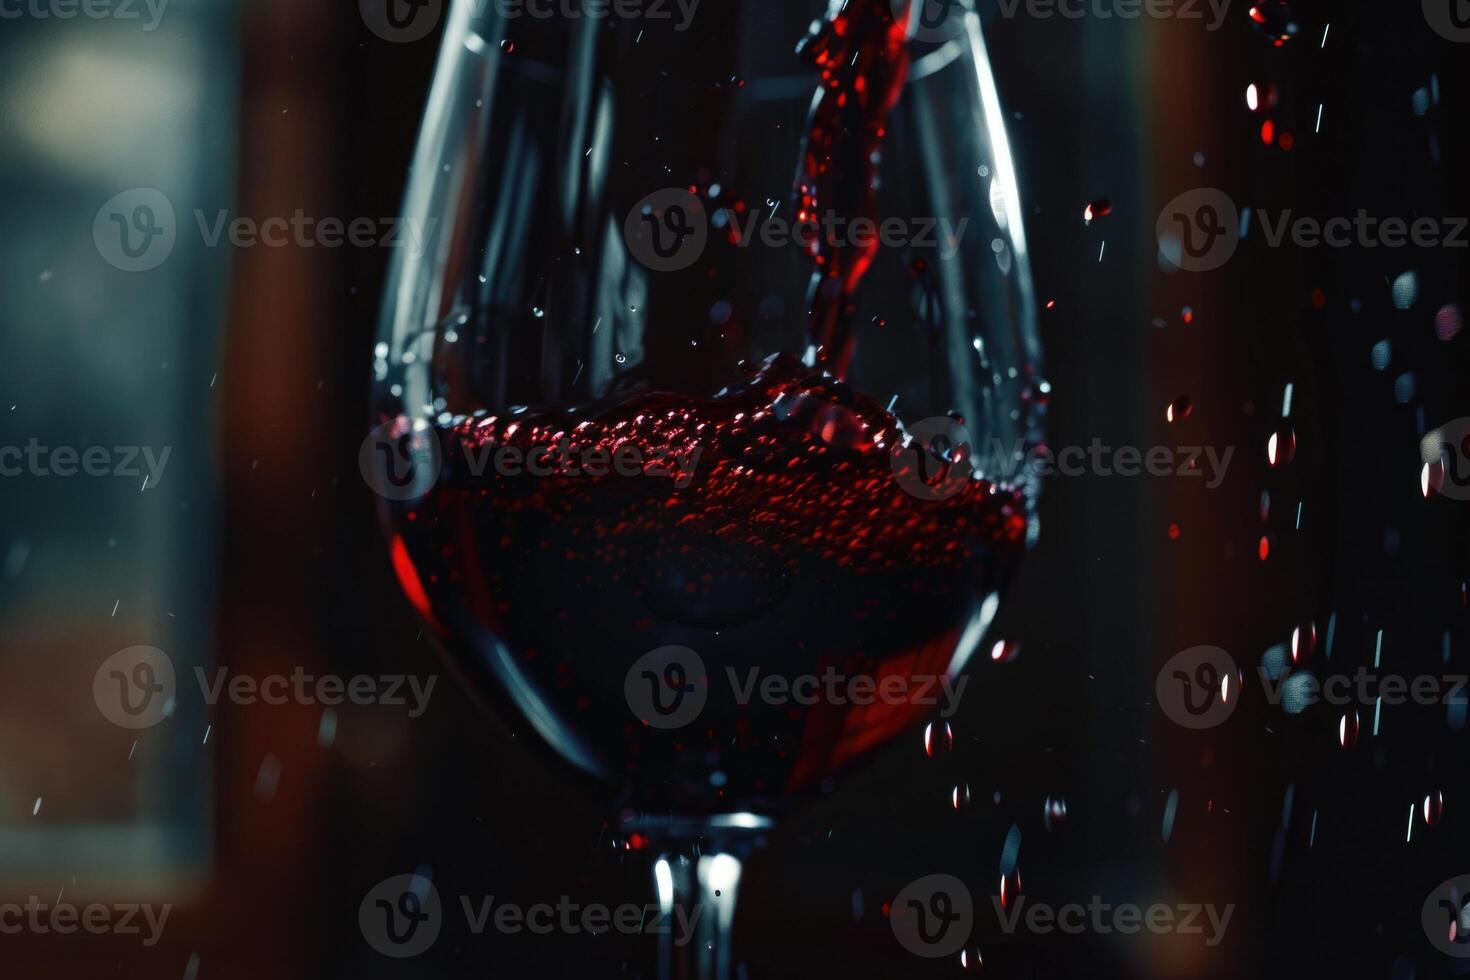 Pour red wine Pour red wine photo